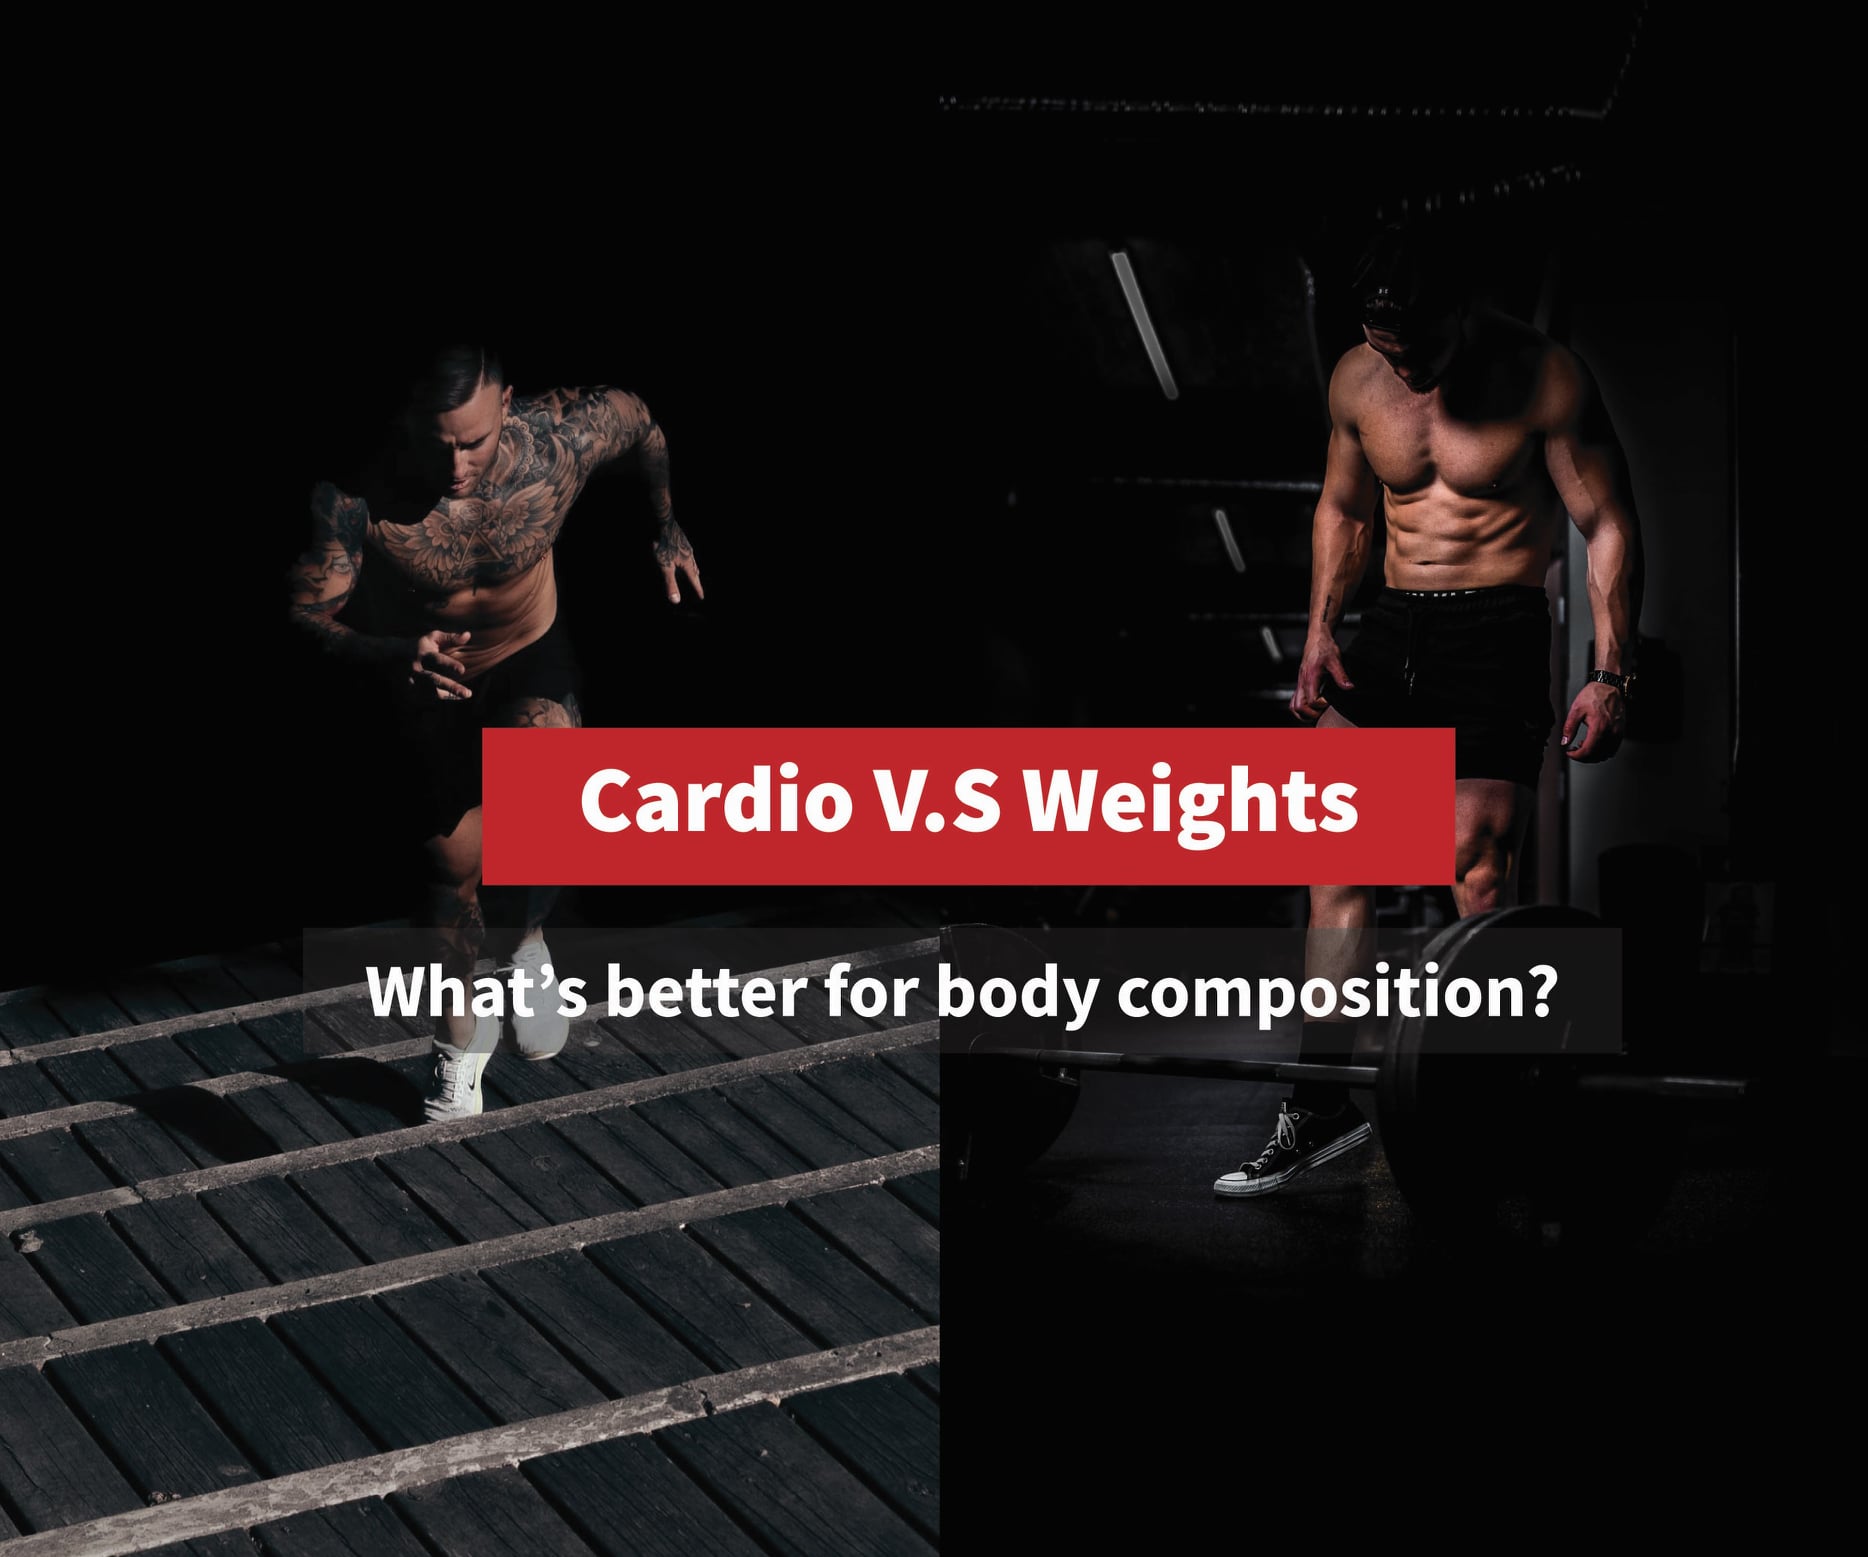 Cardio vs Weights vs Concurrent: What’s better for body composition?